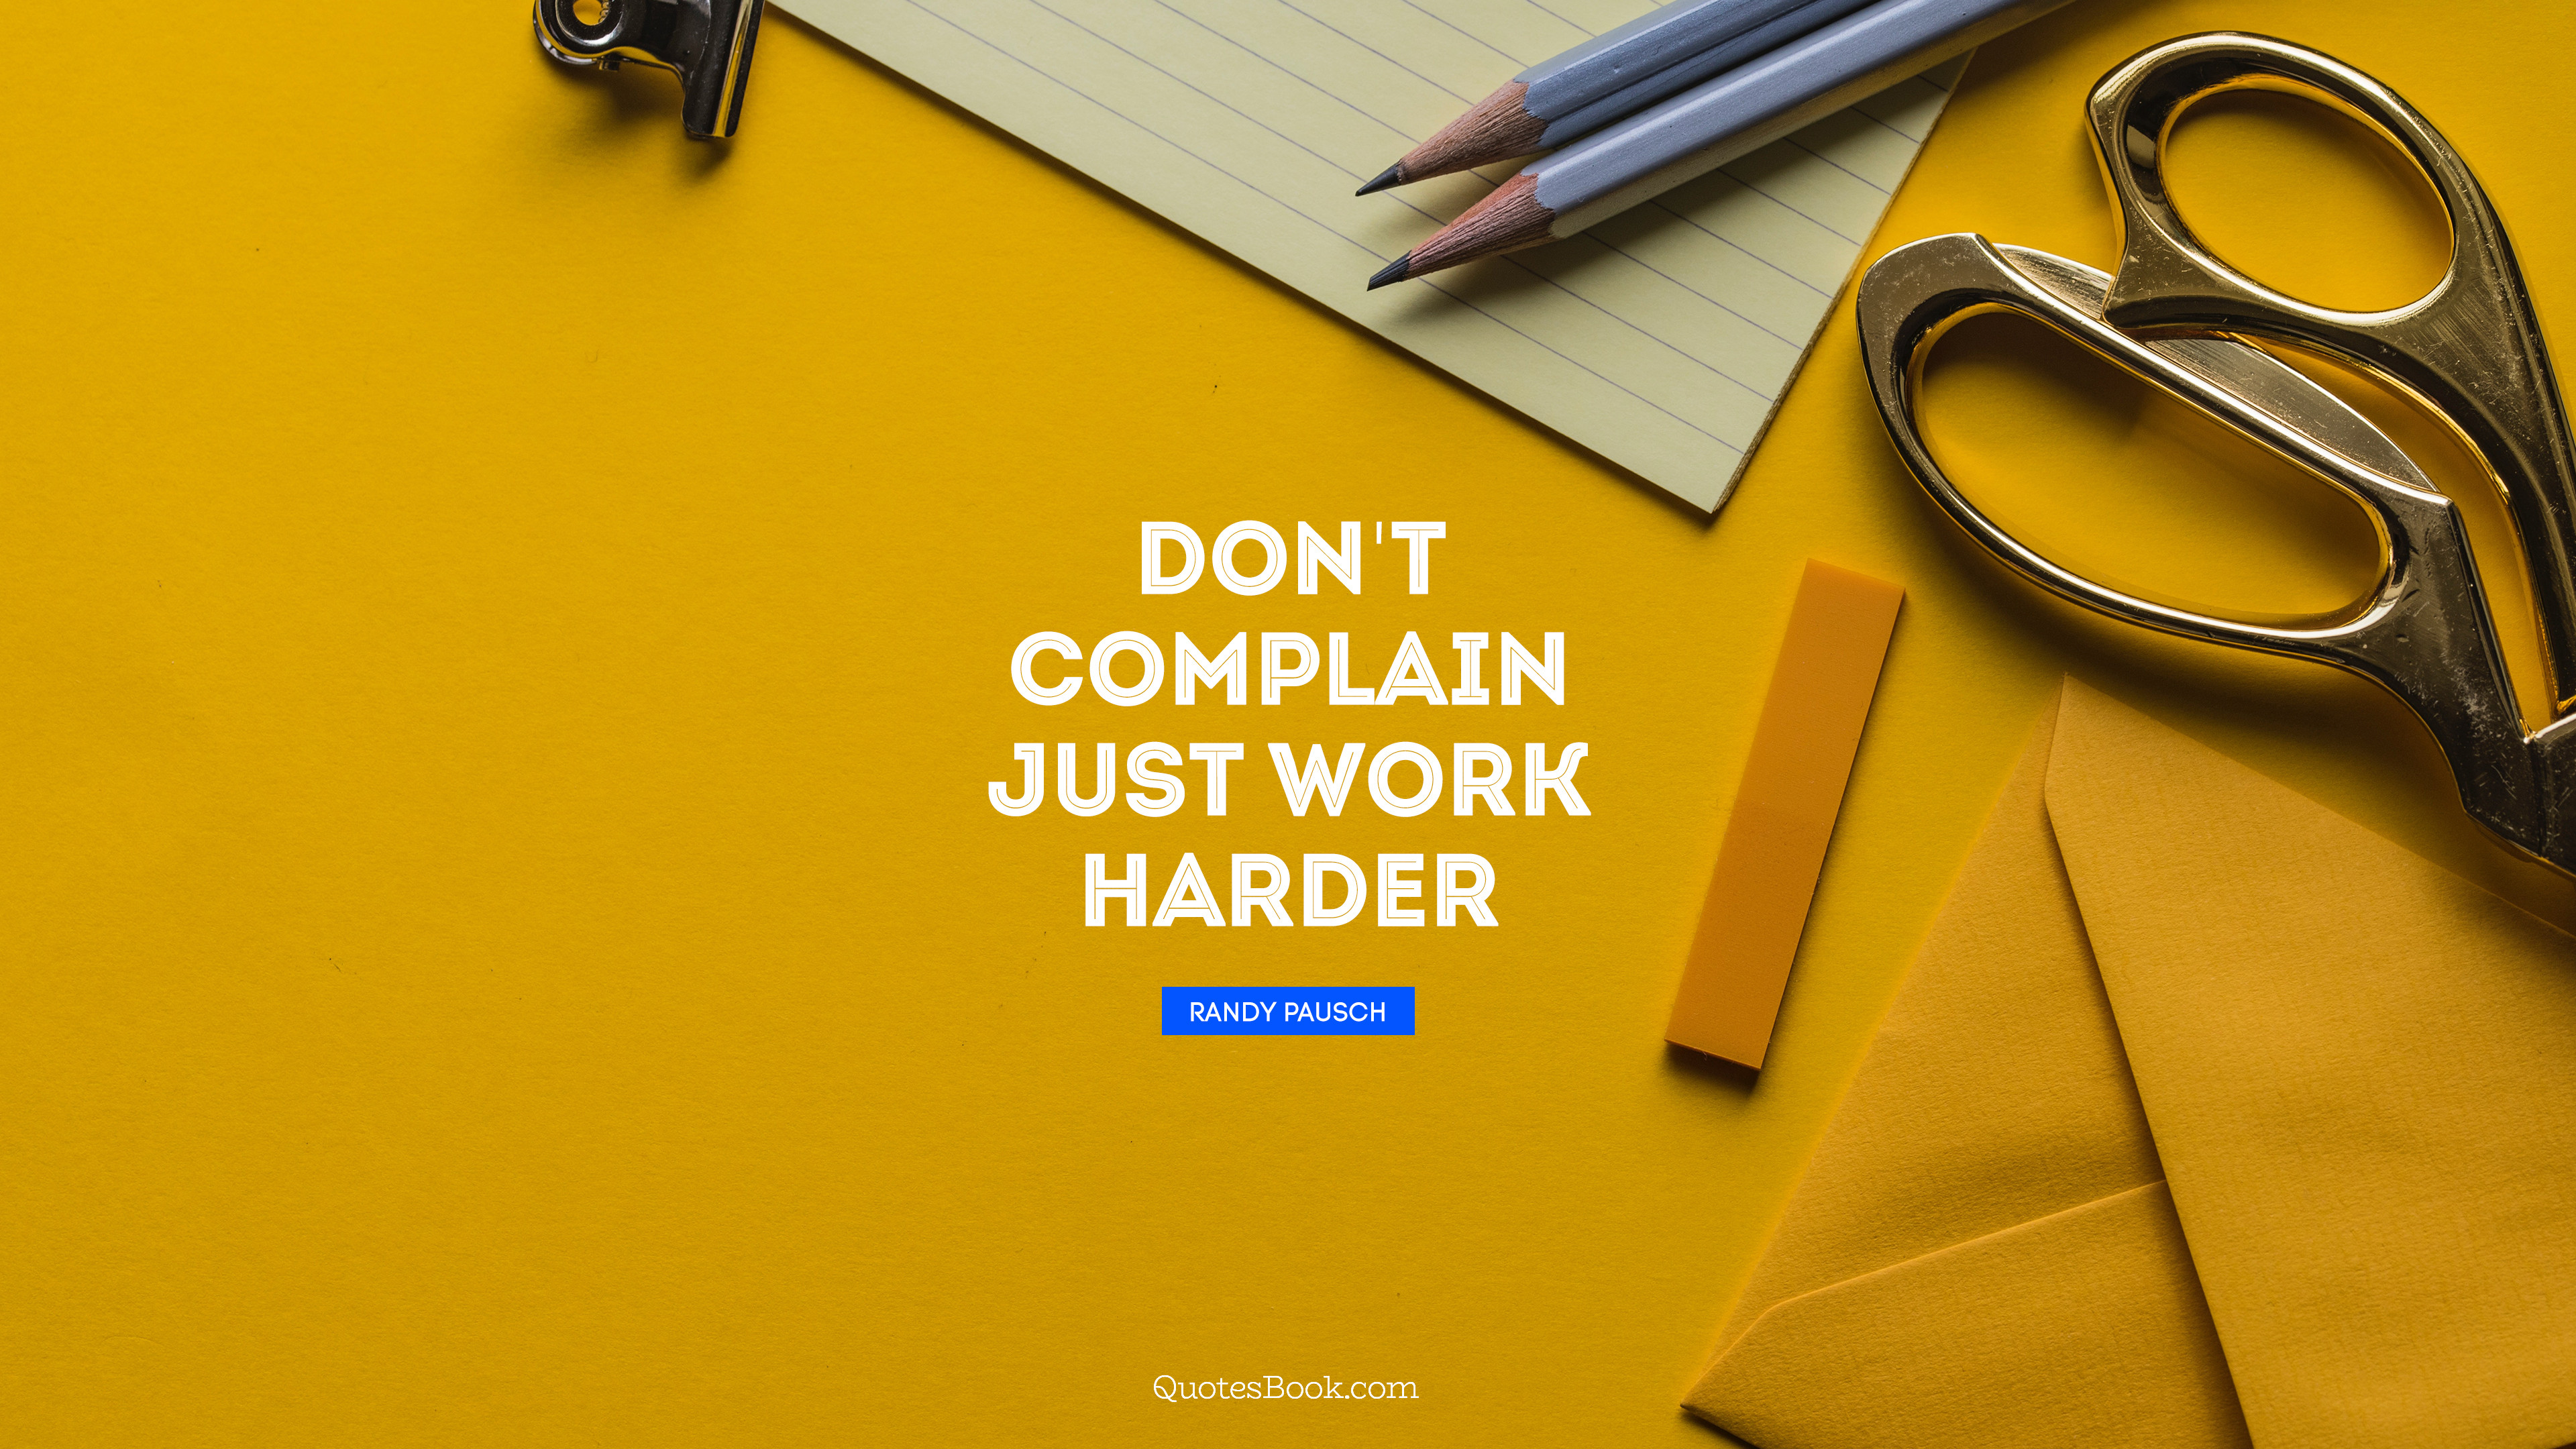 Don't complain just work harder. - Quote by Randy Pausch - Page 3 -  QuotesBook